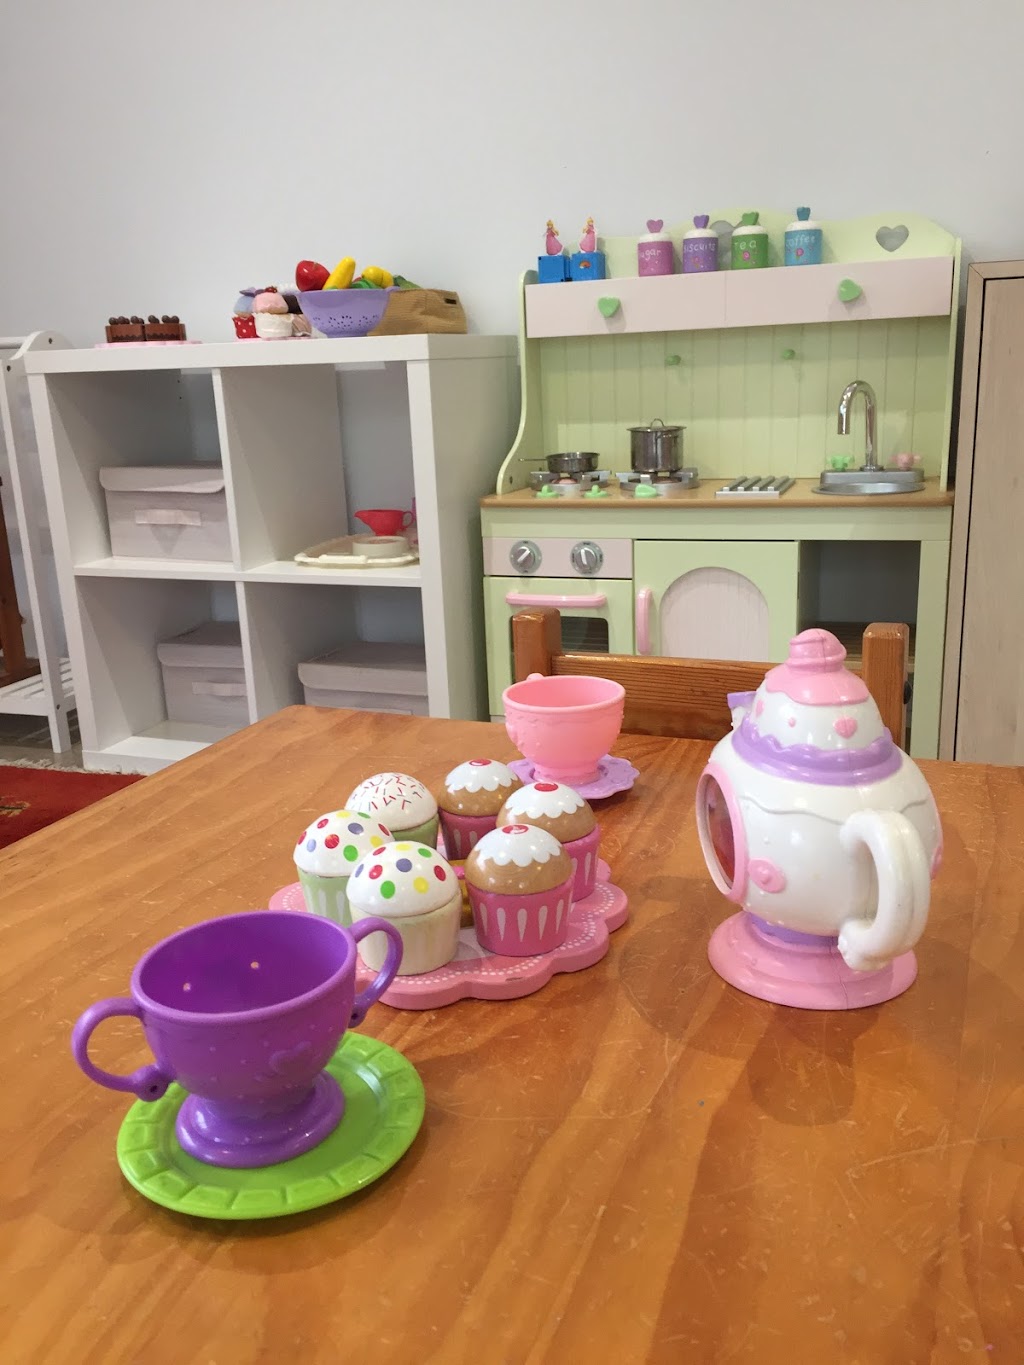 Carlingford Family Day Care |  | Keats St, Carlingford NSW 2118, Australia | 0415499741 OR +61 415 499 741